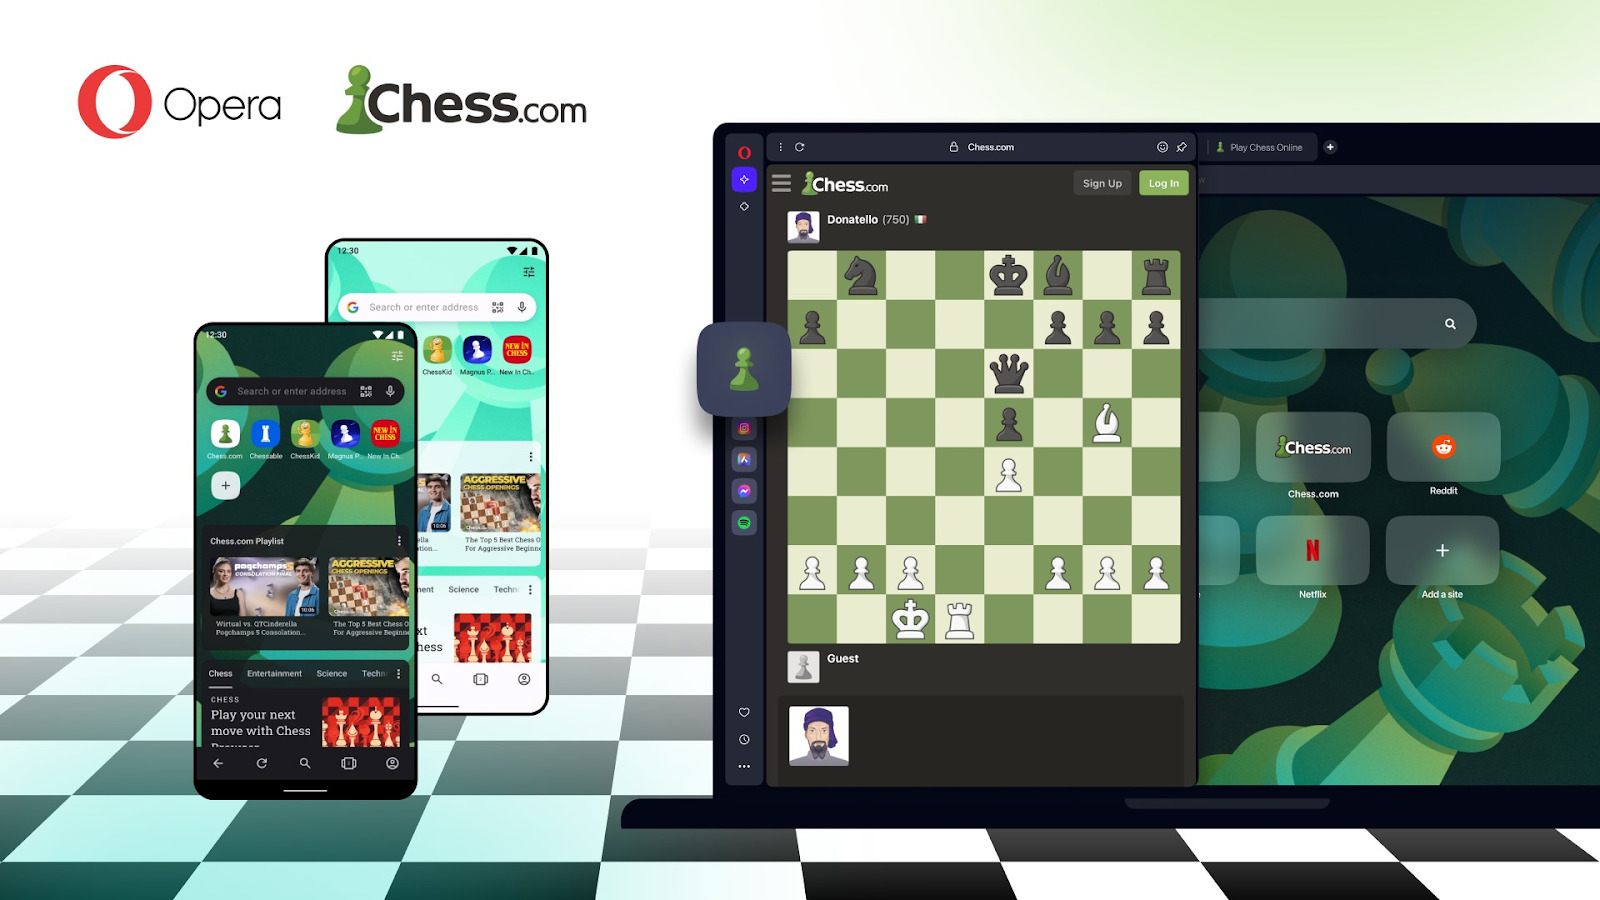 A desktop screen and two Android devices show off the capabilities and aesthetic of Opera's new custom-themed chess browsers, created in collaboration with Chess.com.